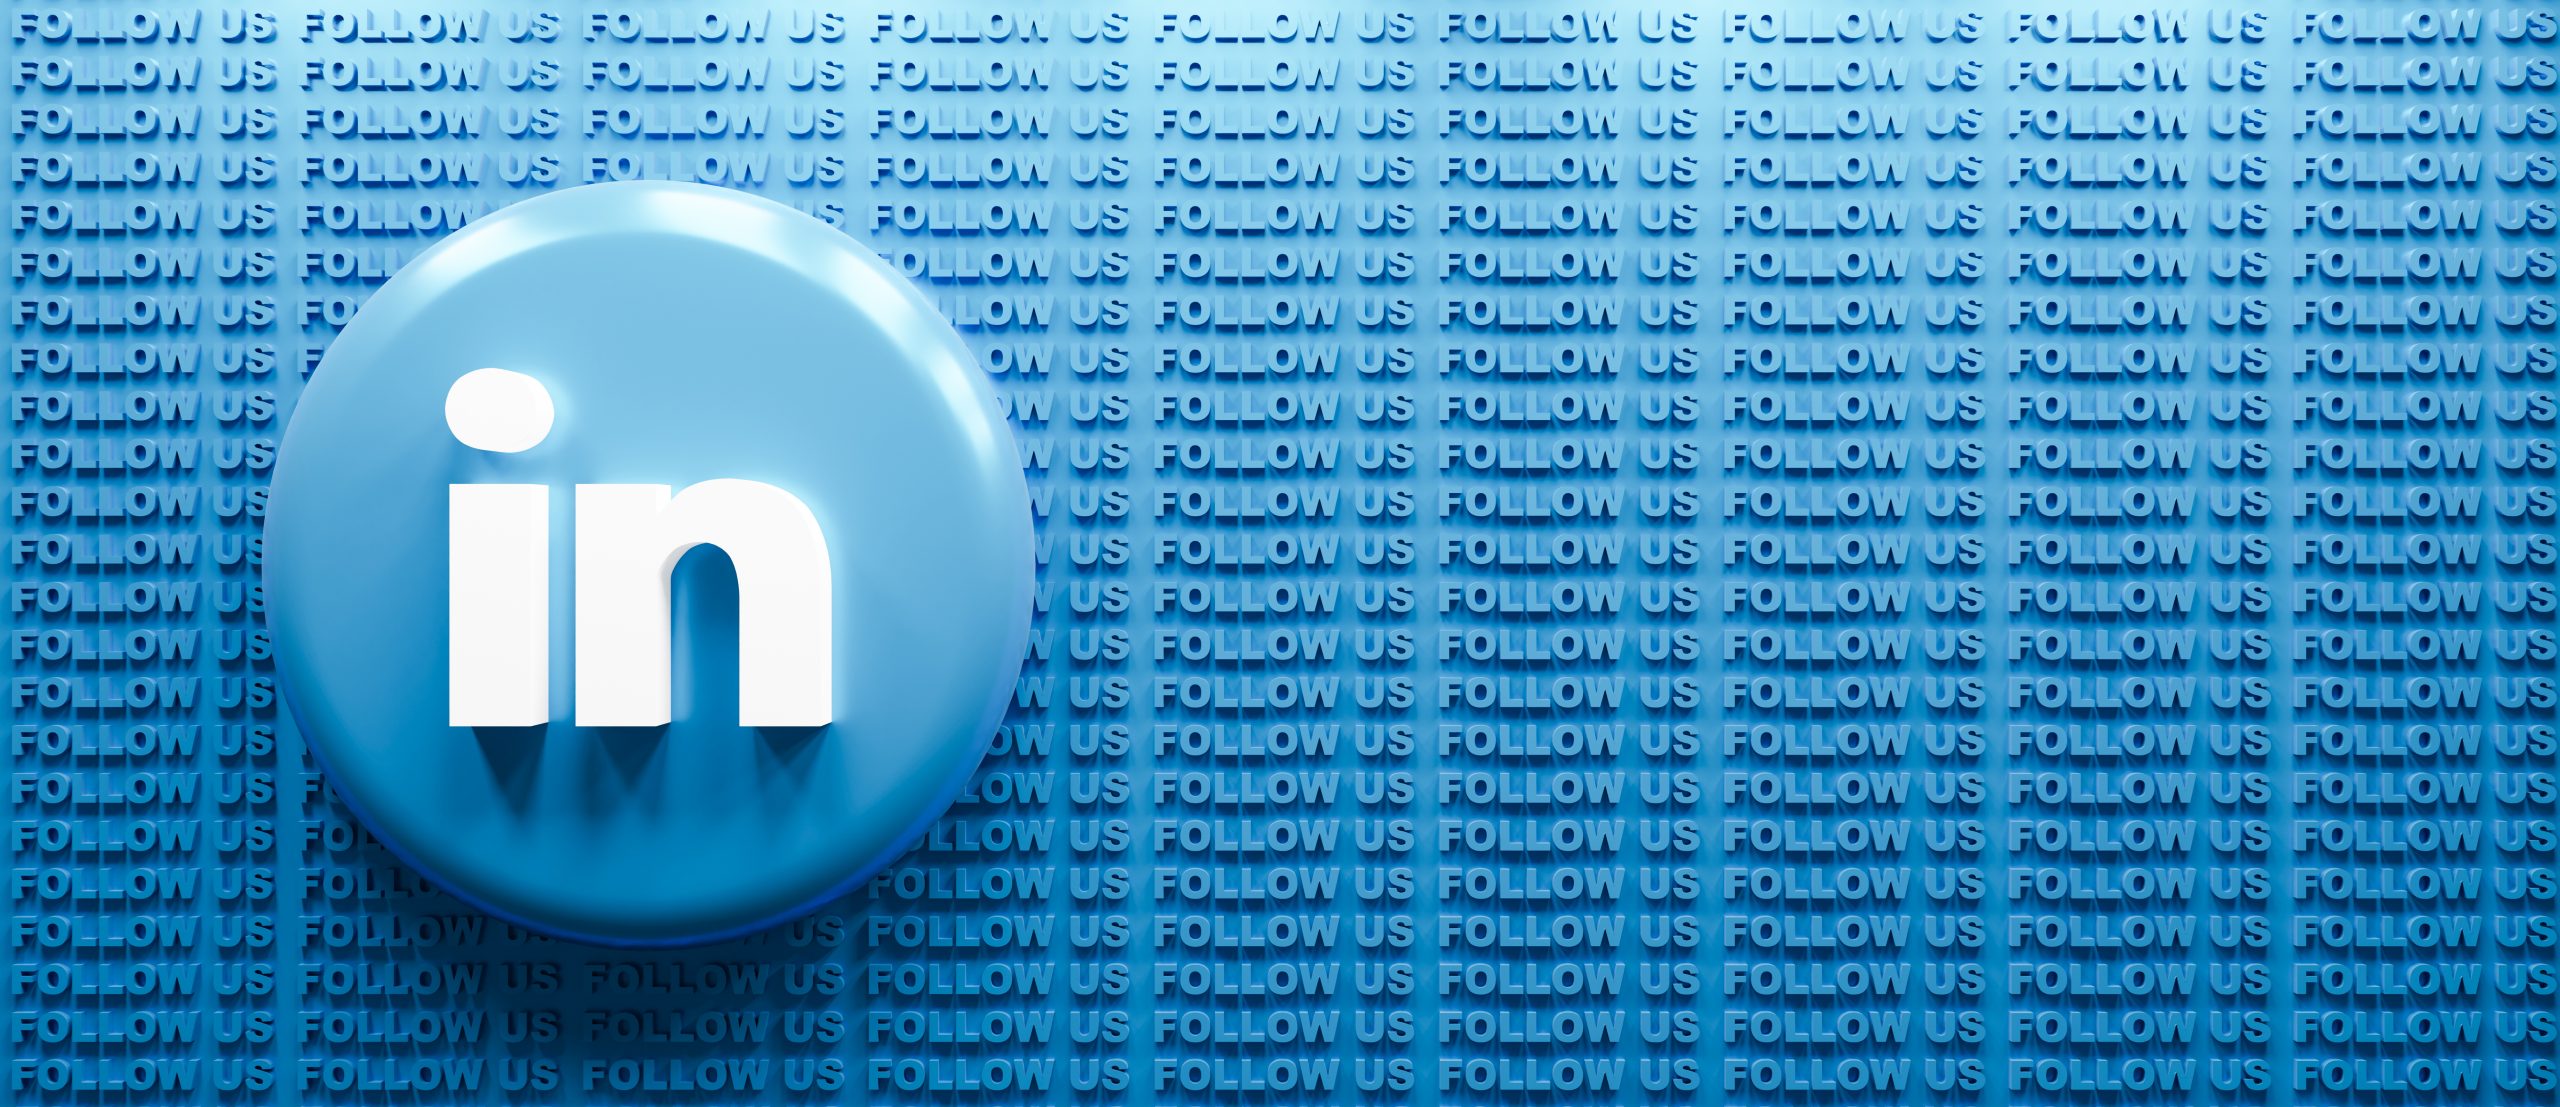 3d rendering linkedln logo with follow us text background